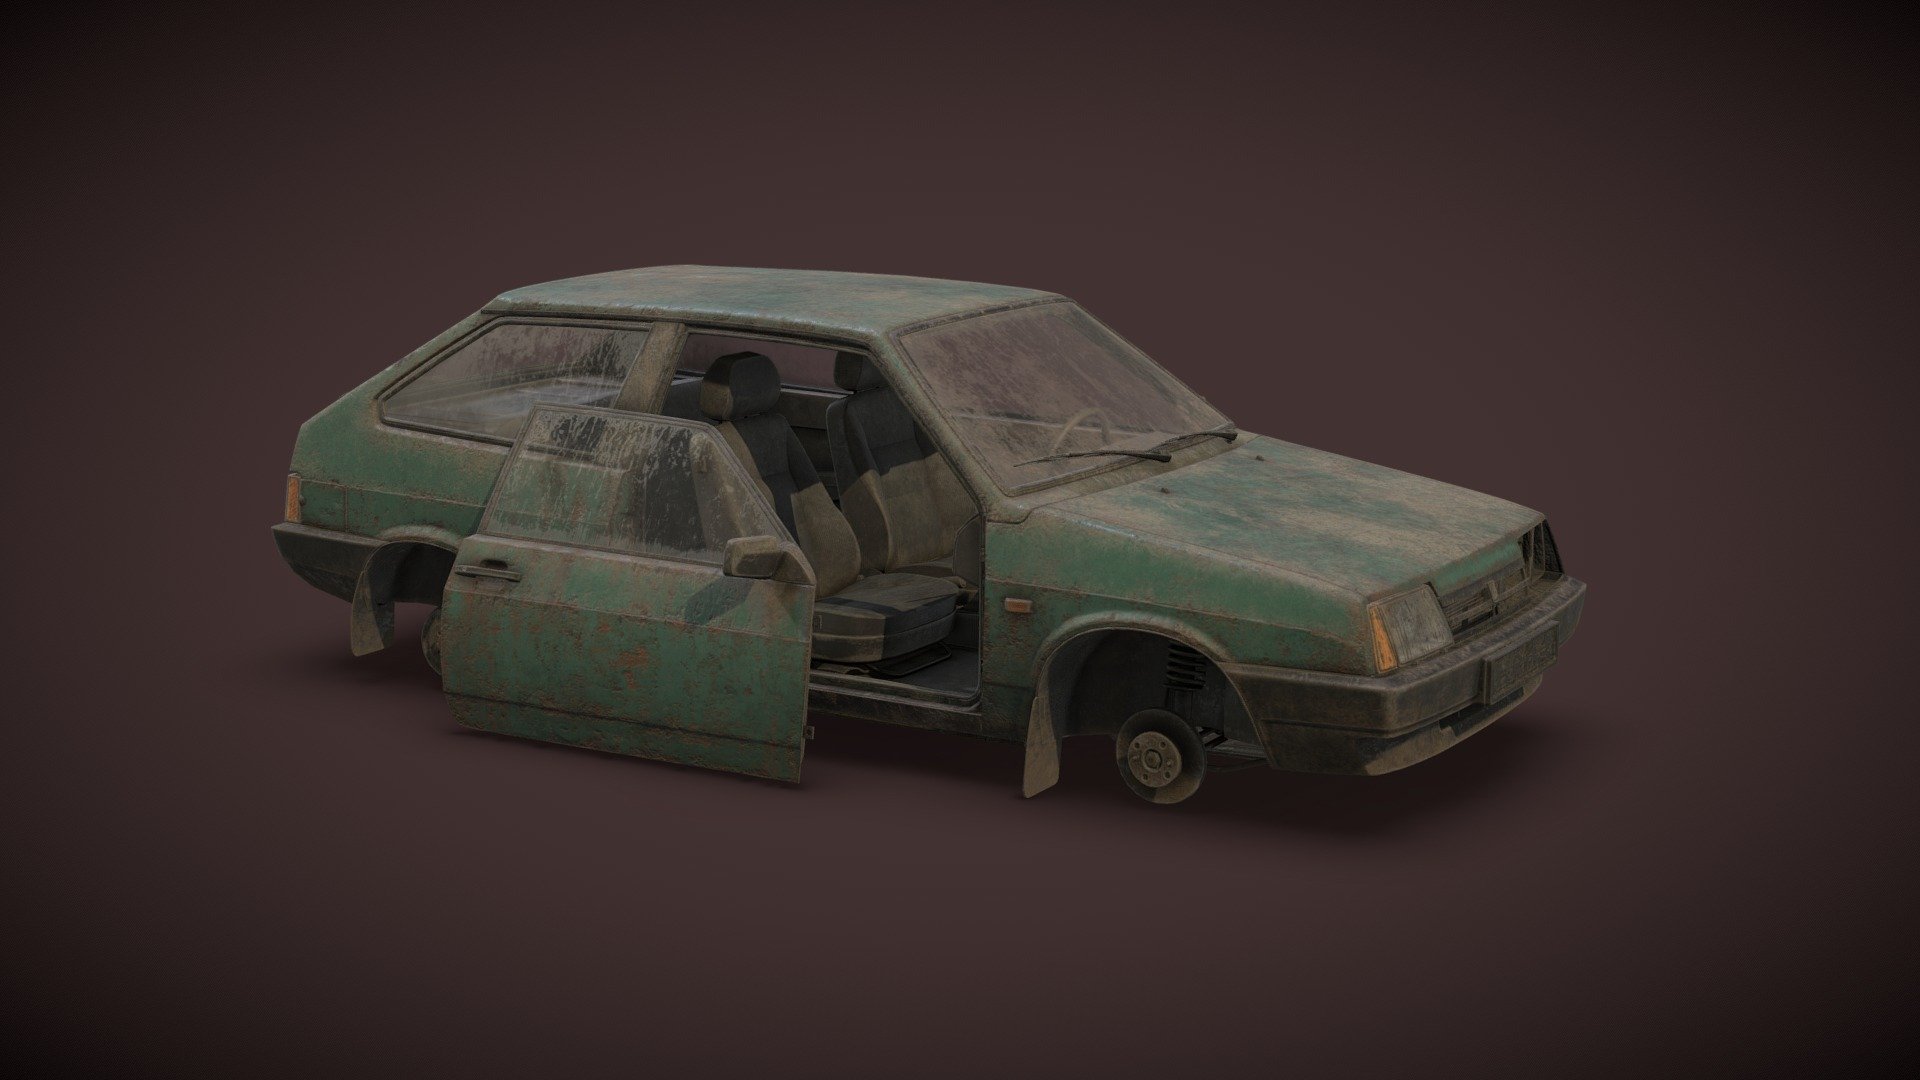 Lada Samara/vaz 2108 lowpoly model for DEADSIDE game project.
Made in 3dsMax and SubstancePainter - 2108 Model Rusted - 3D model by dartp 3d model